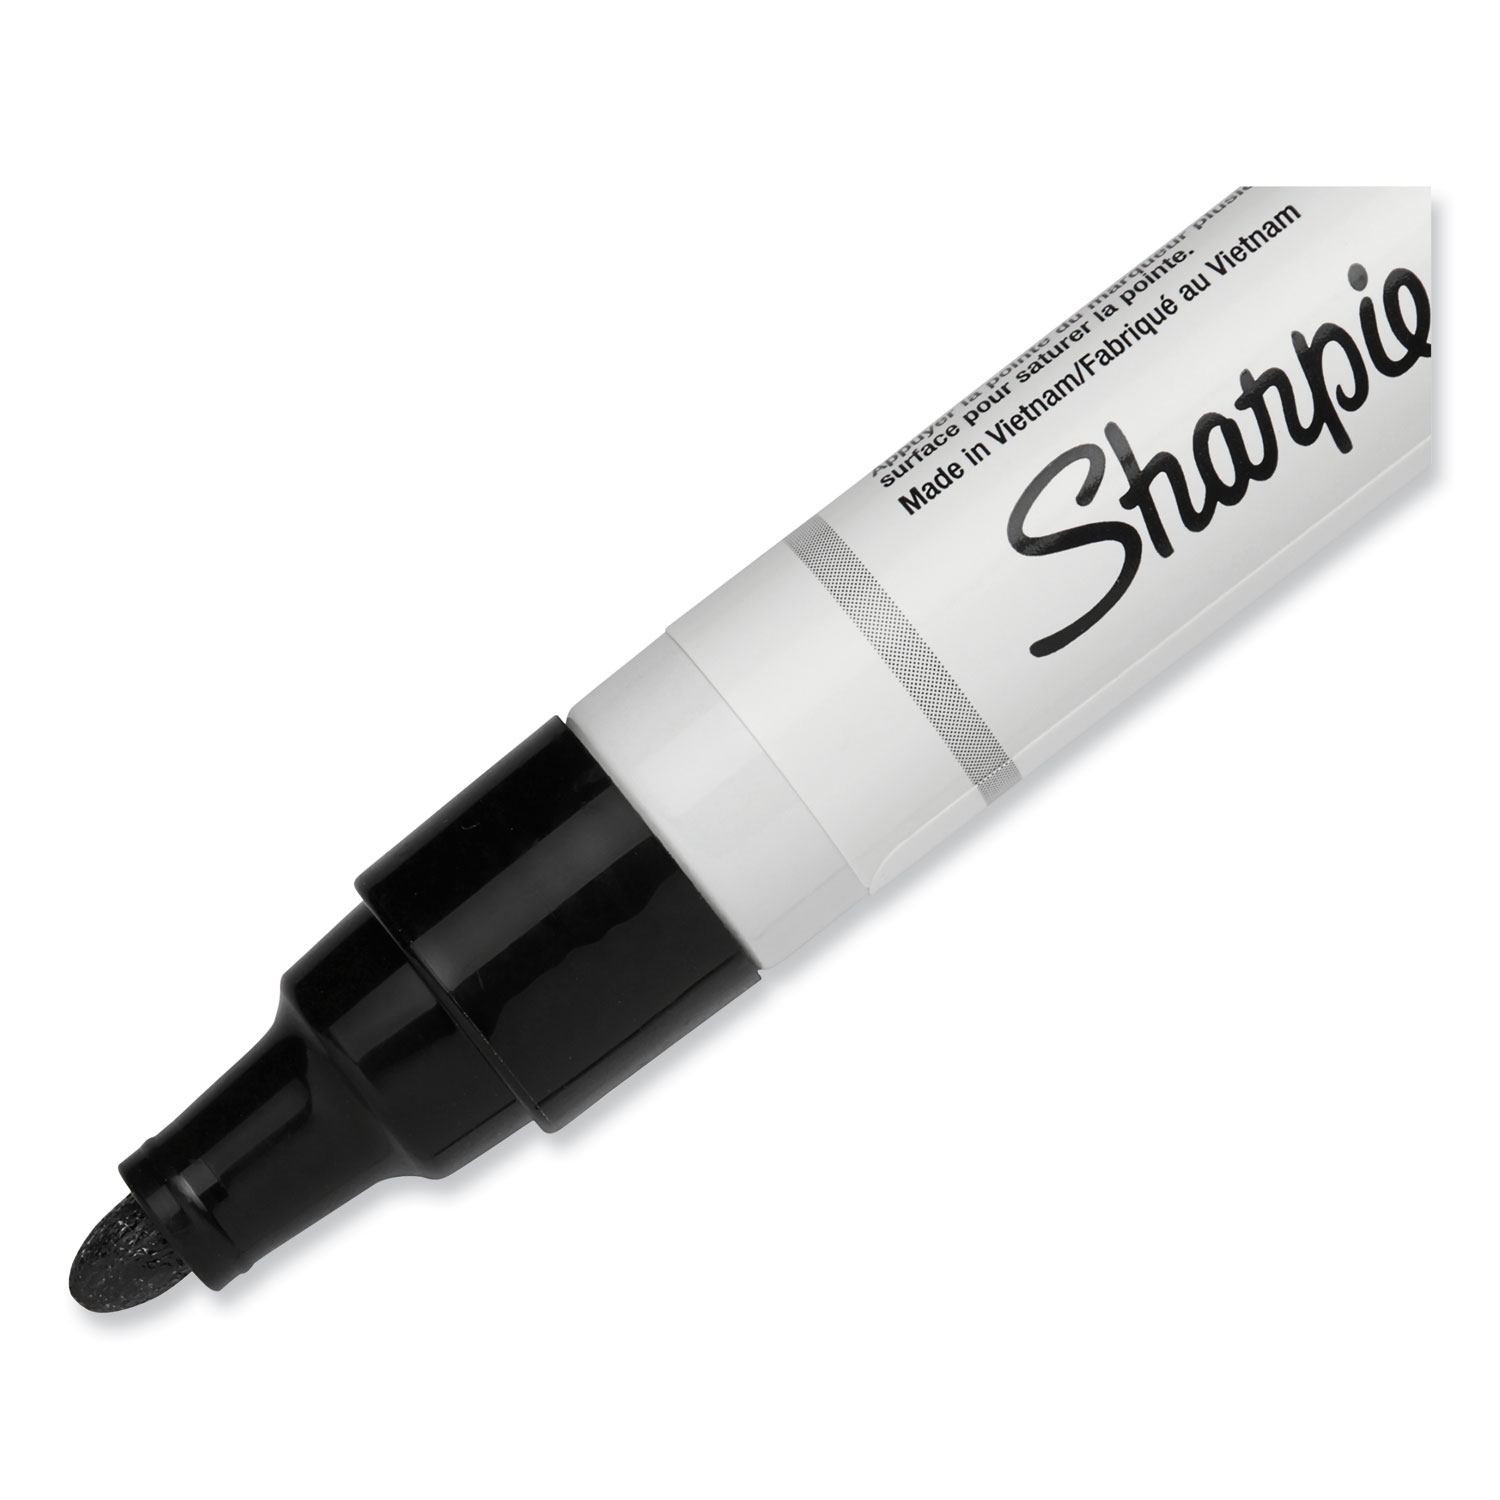 Sharpie Oil-Based Paint Marker, Extra-Fine Point, White Barrel, White Ink 1  ct